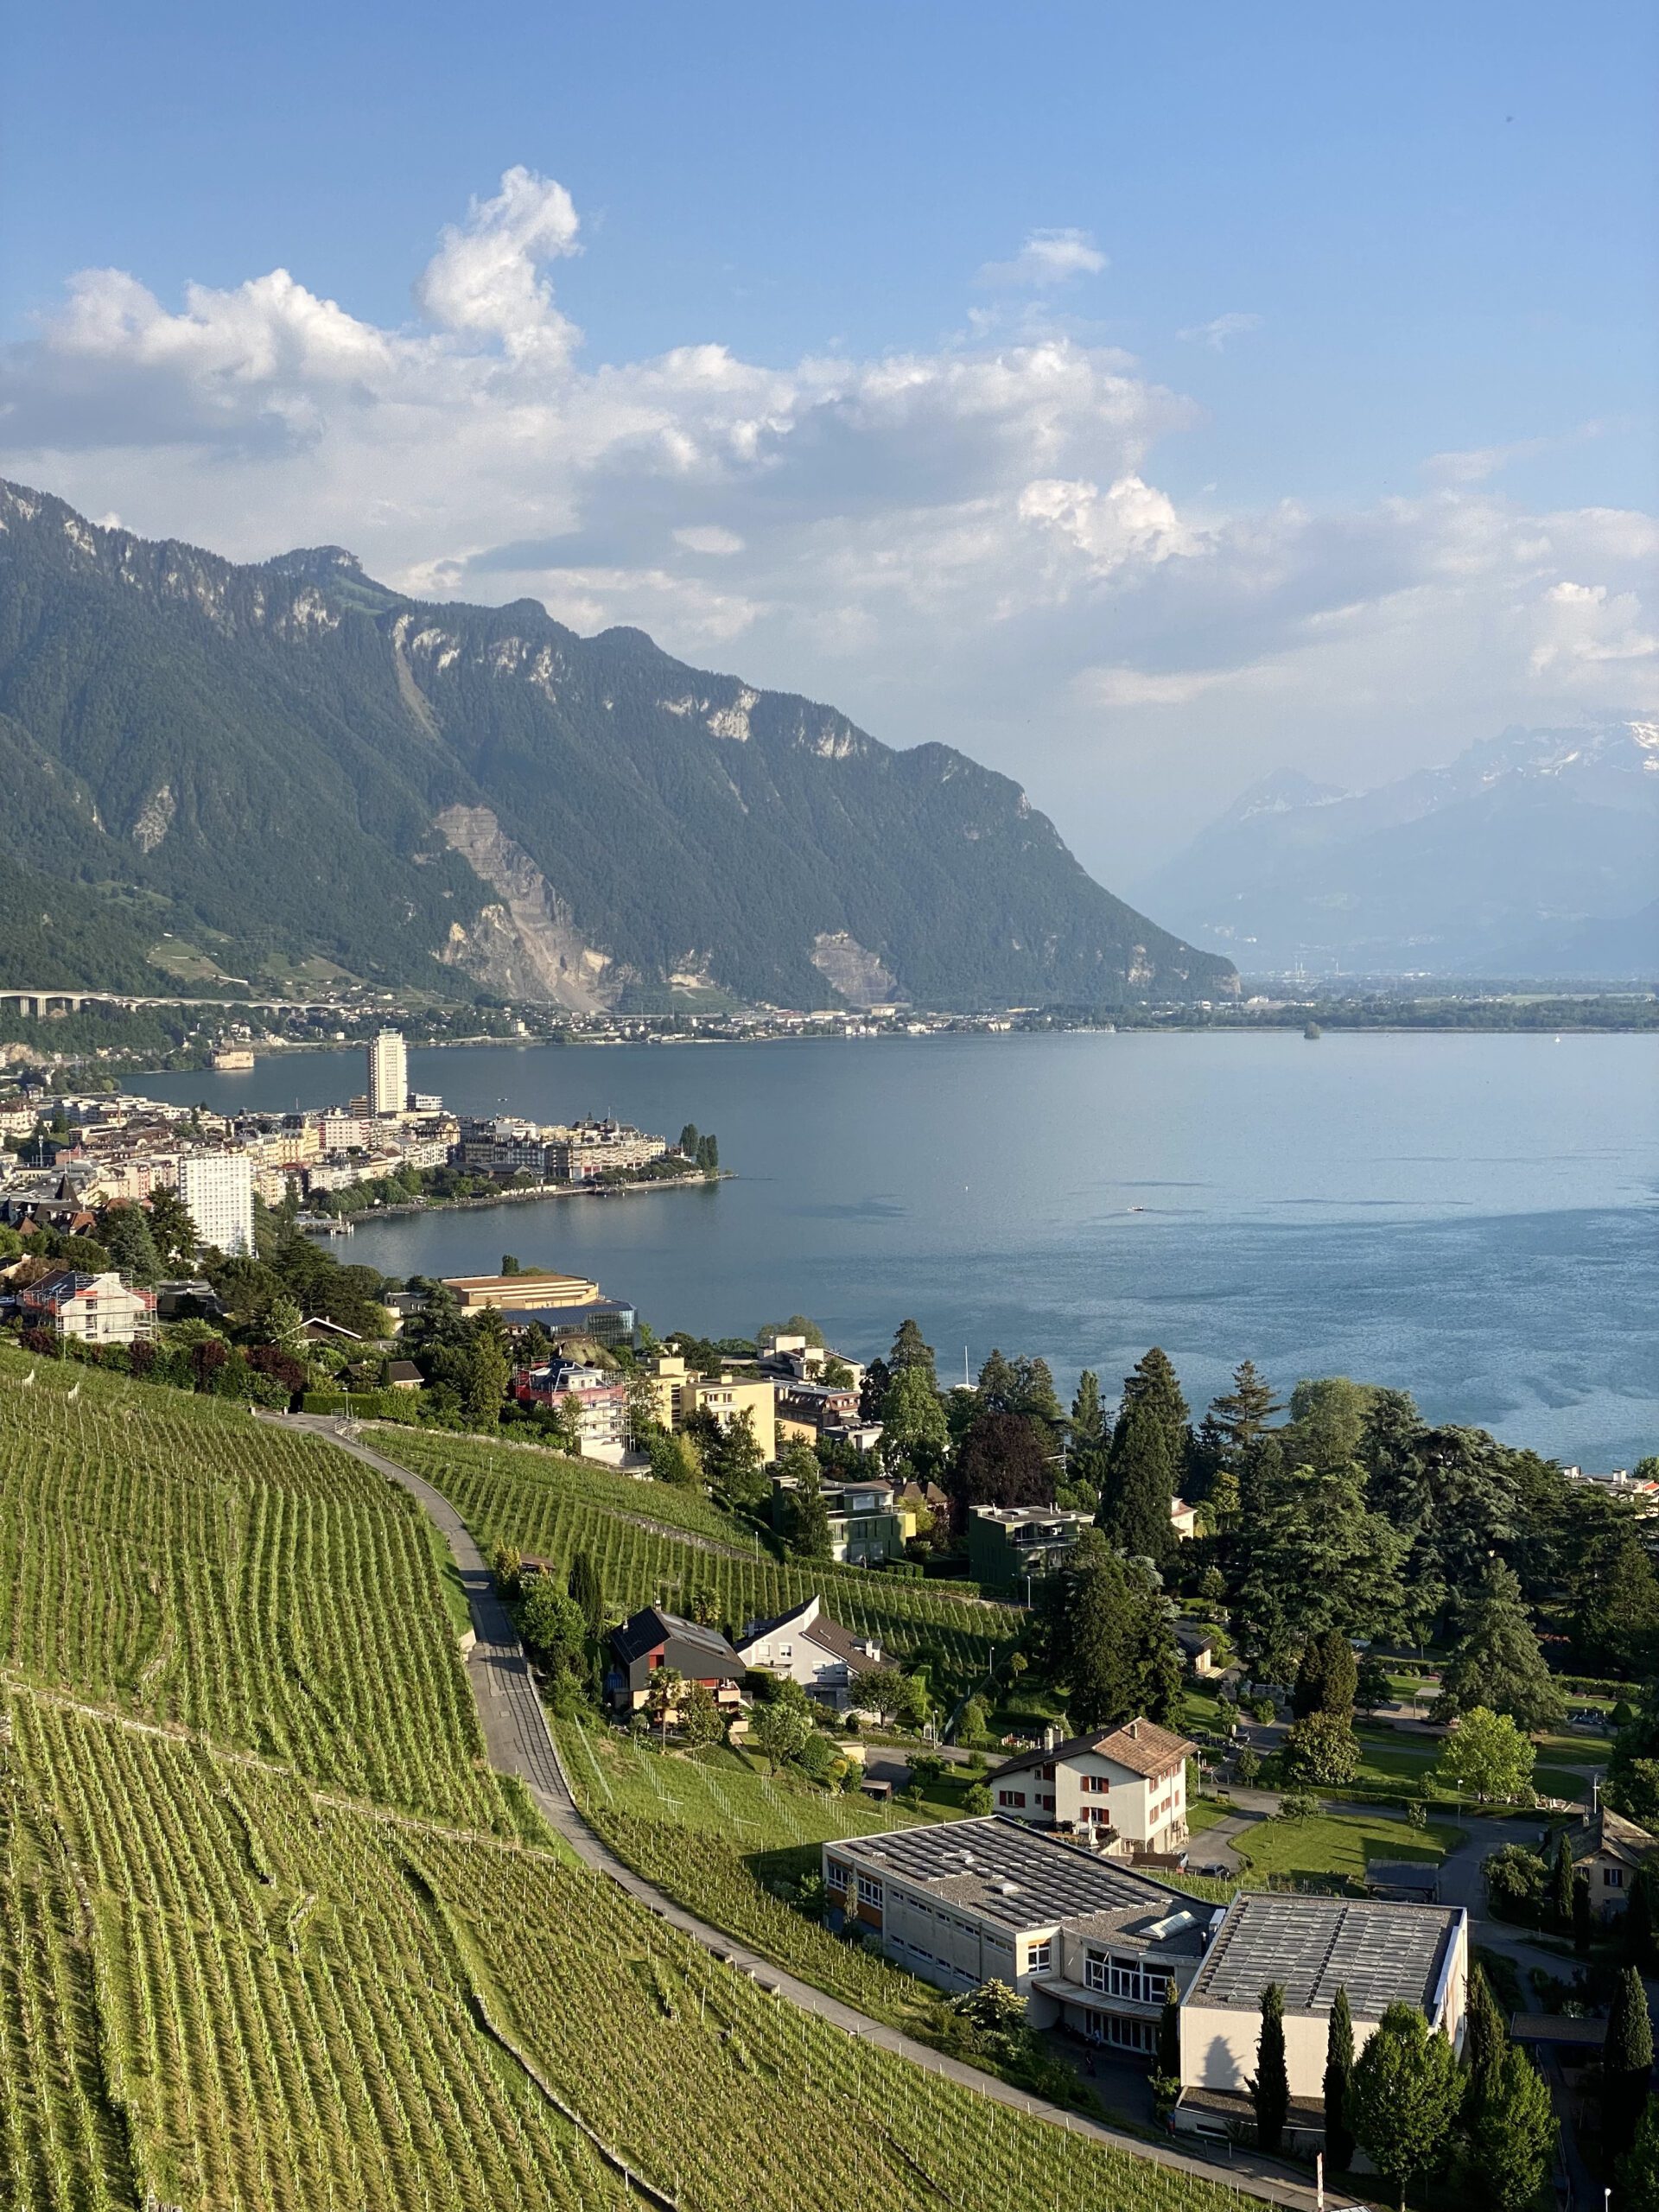 A whole different side of Switzerland: Lavaux